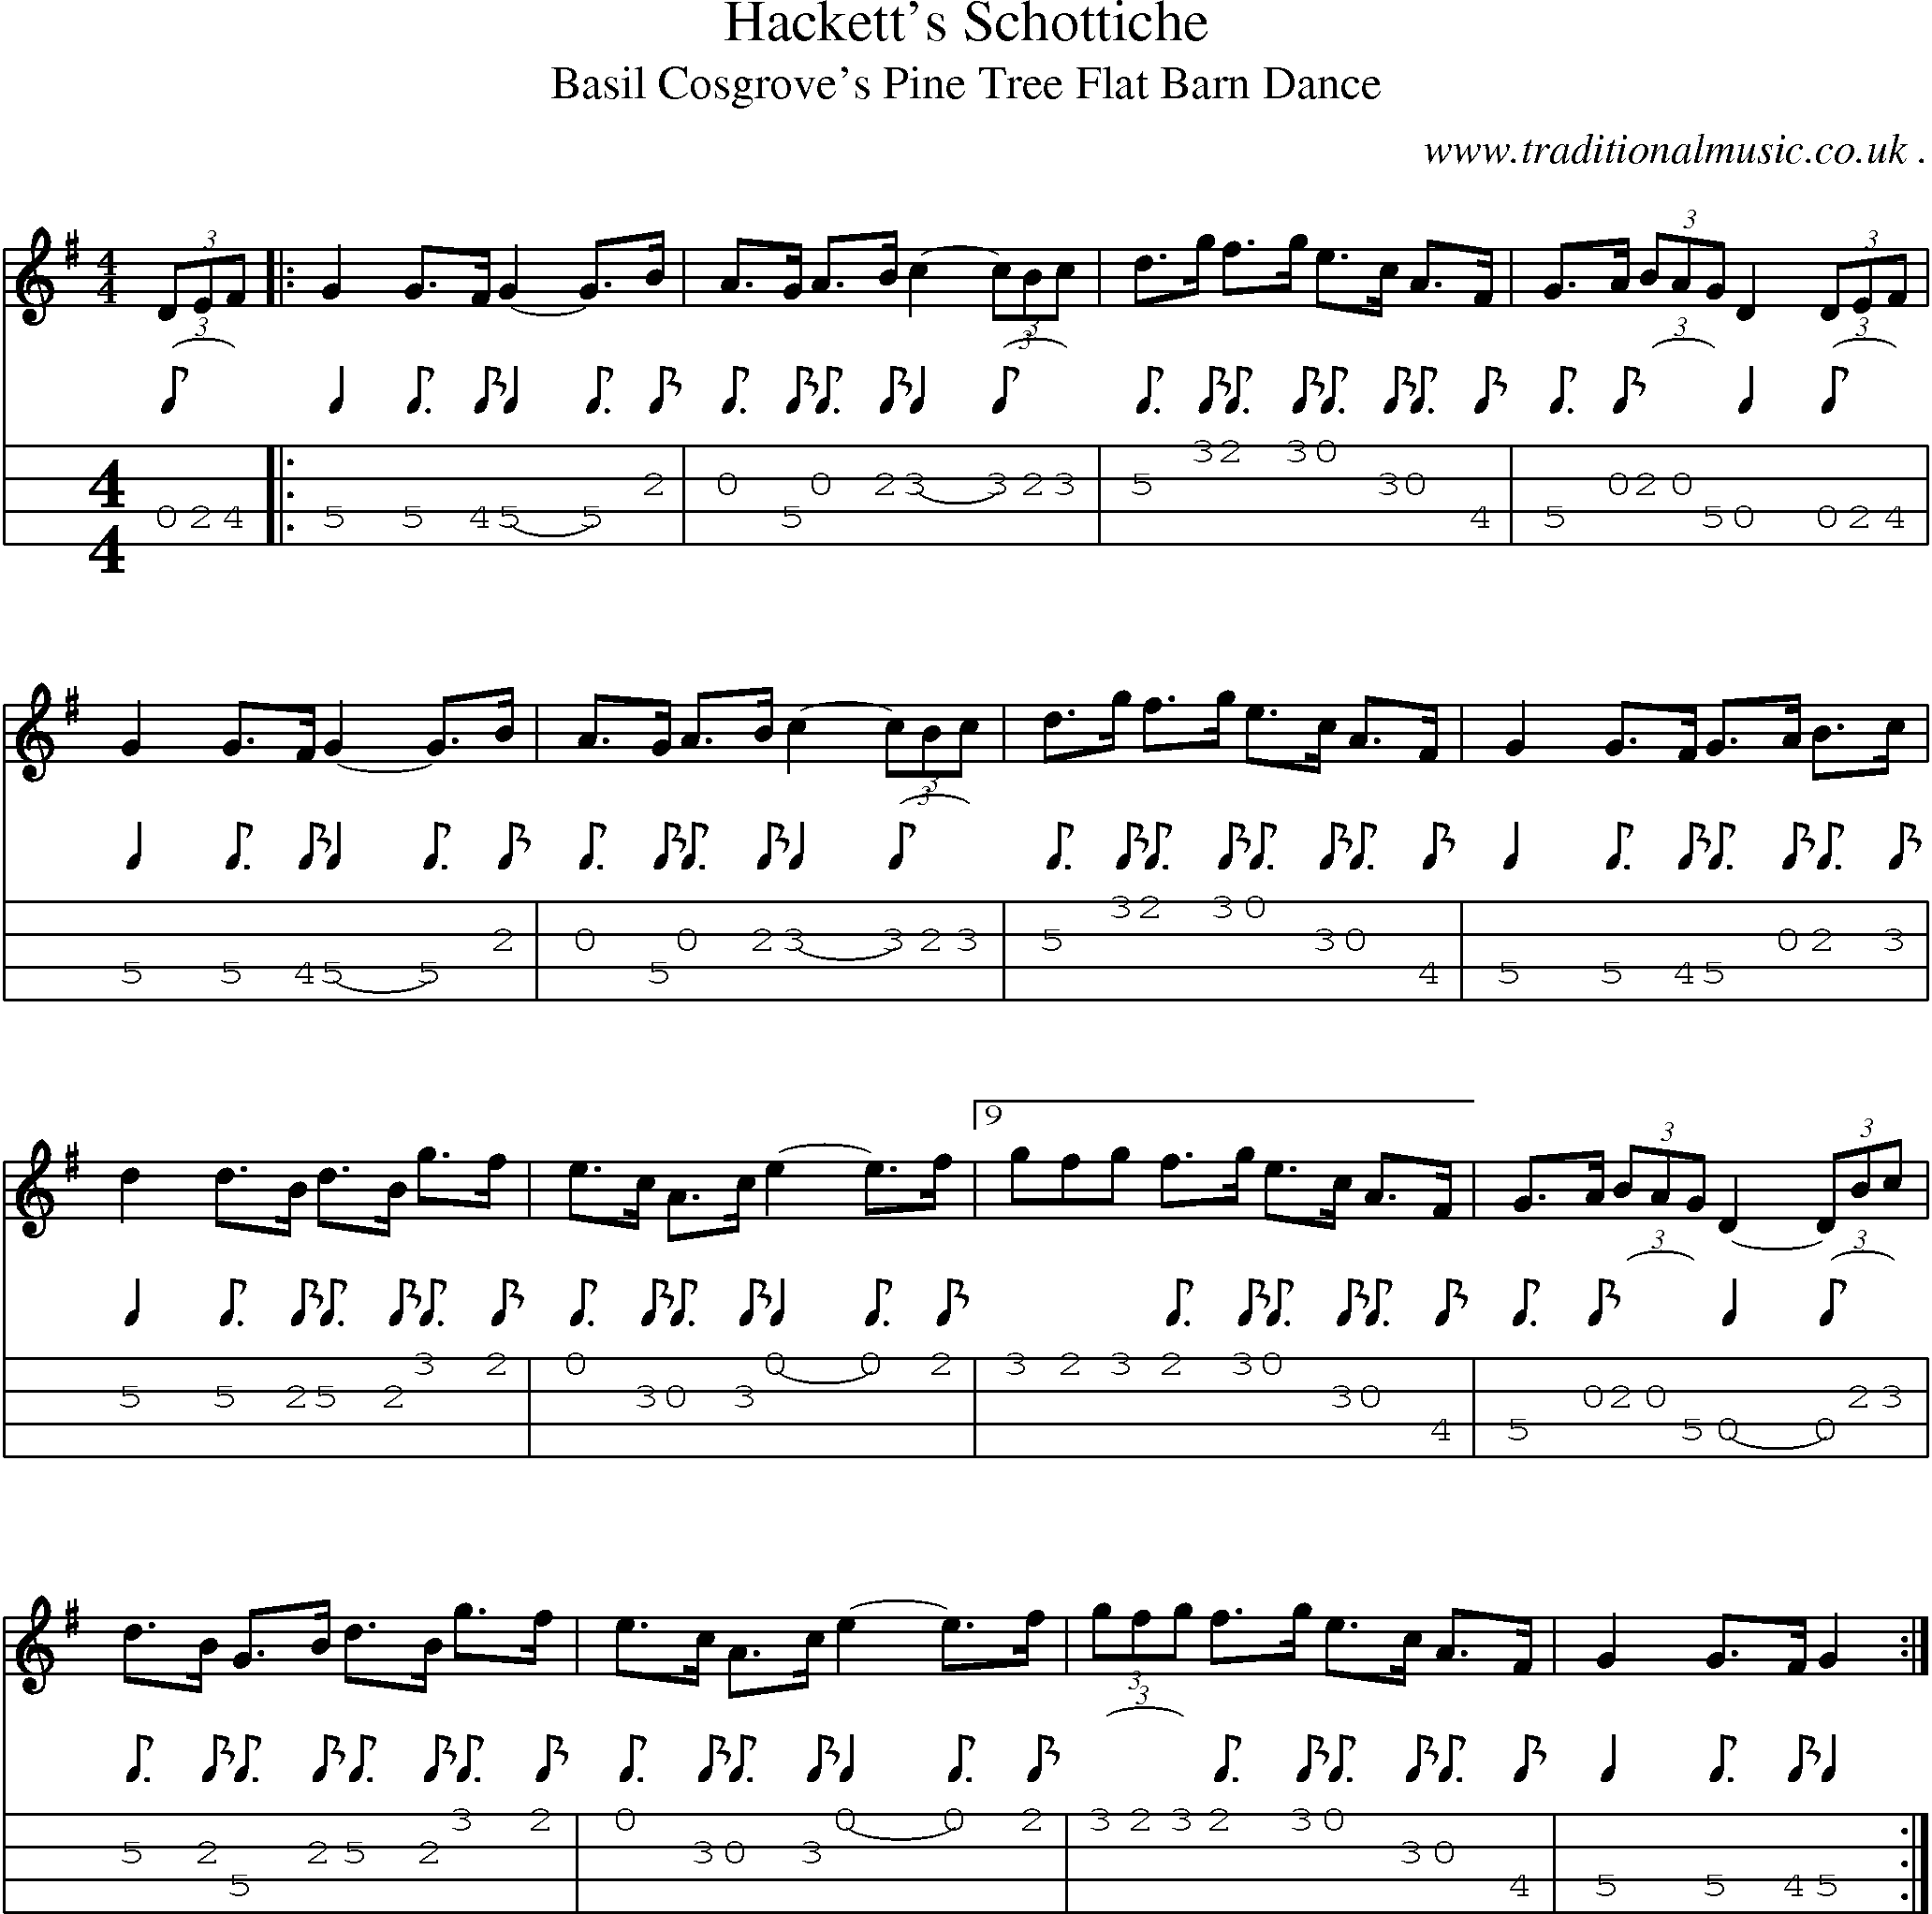 Sheet-Music and Mandolin Tabs for Hacketts Schottiche